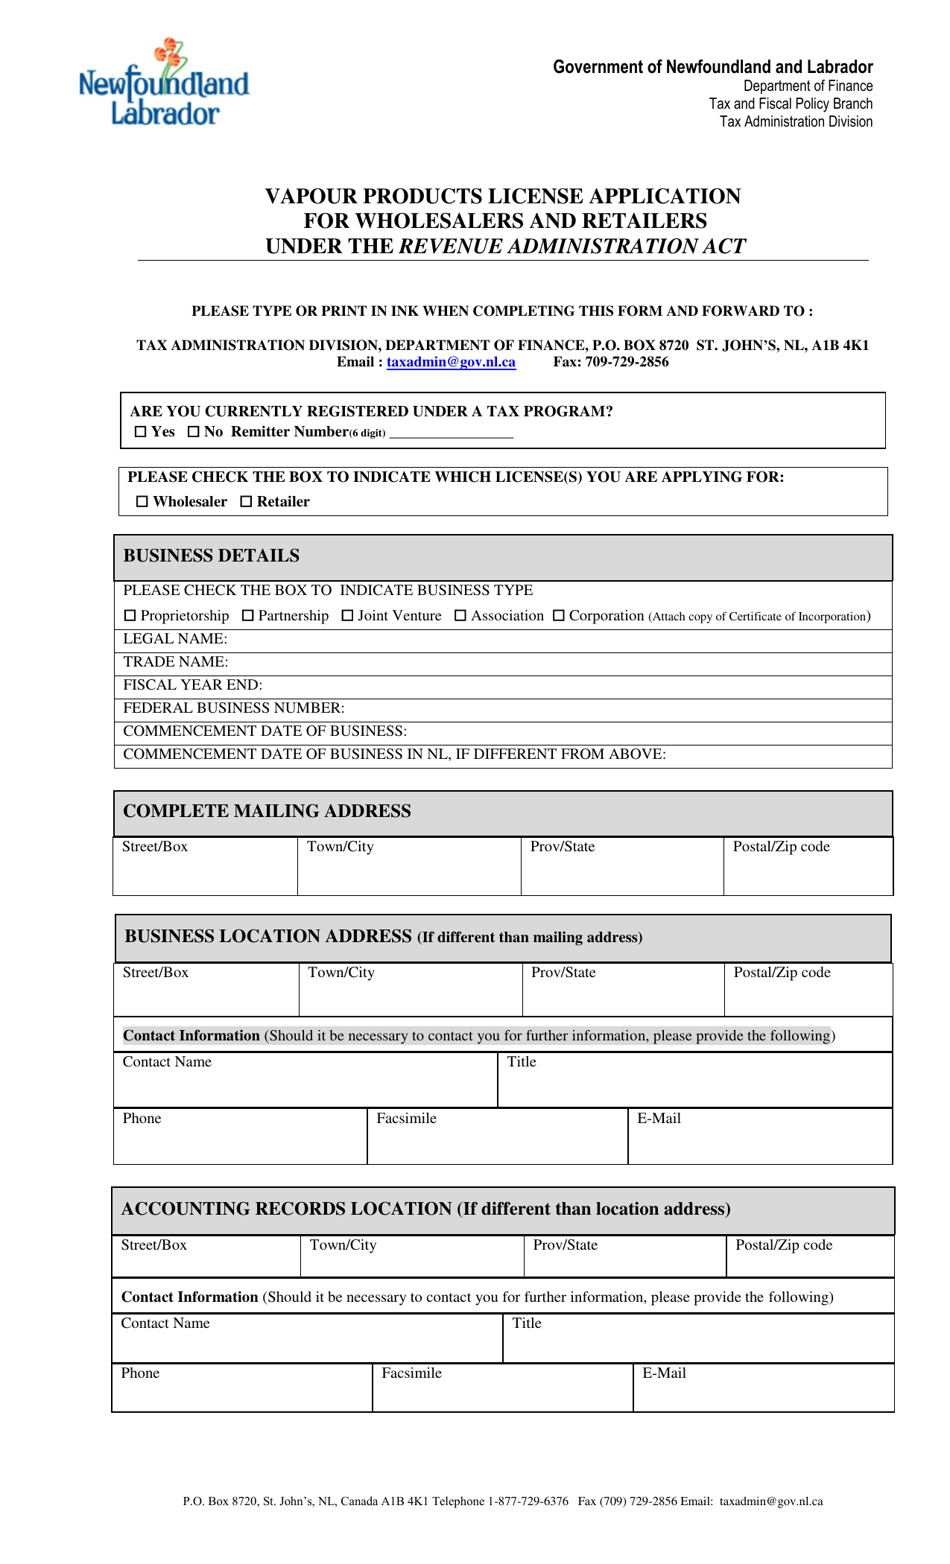 Vapour Products License Application for Wholesalers and Retailers Under the Revenue Administration Act - Newfoundland and Labrador, Canada, Page 1